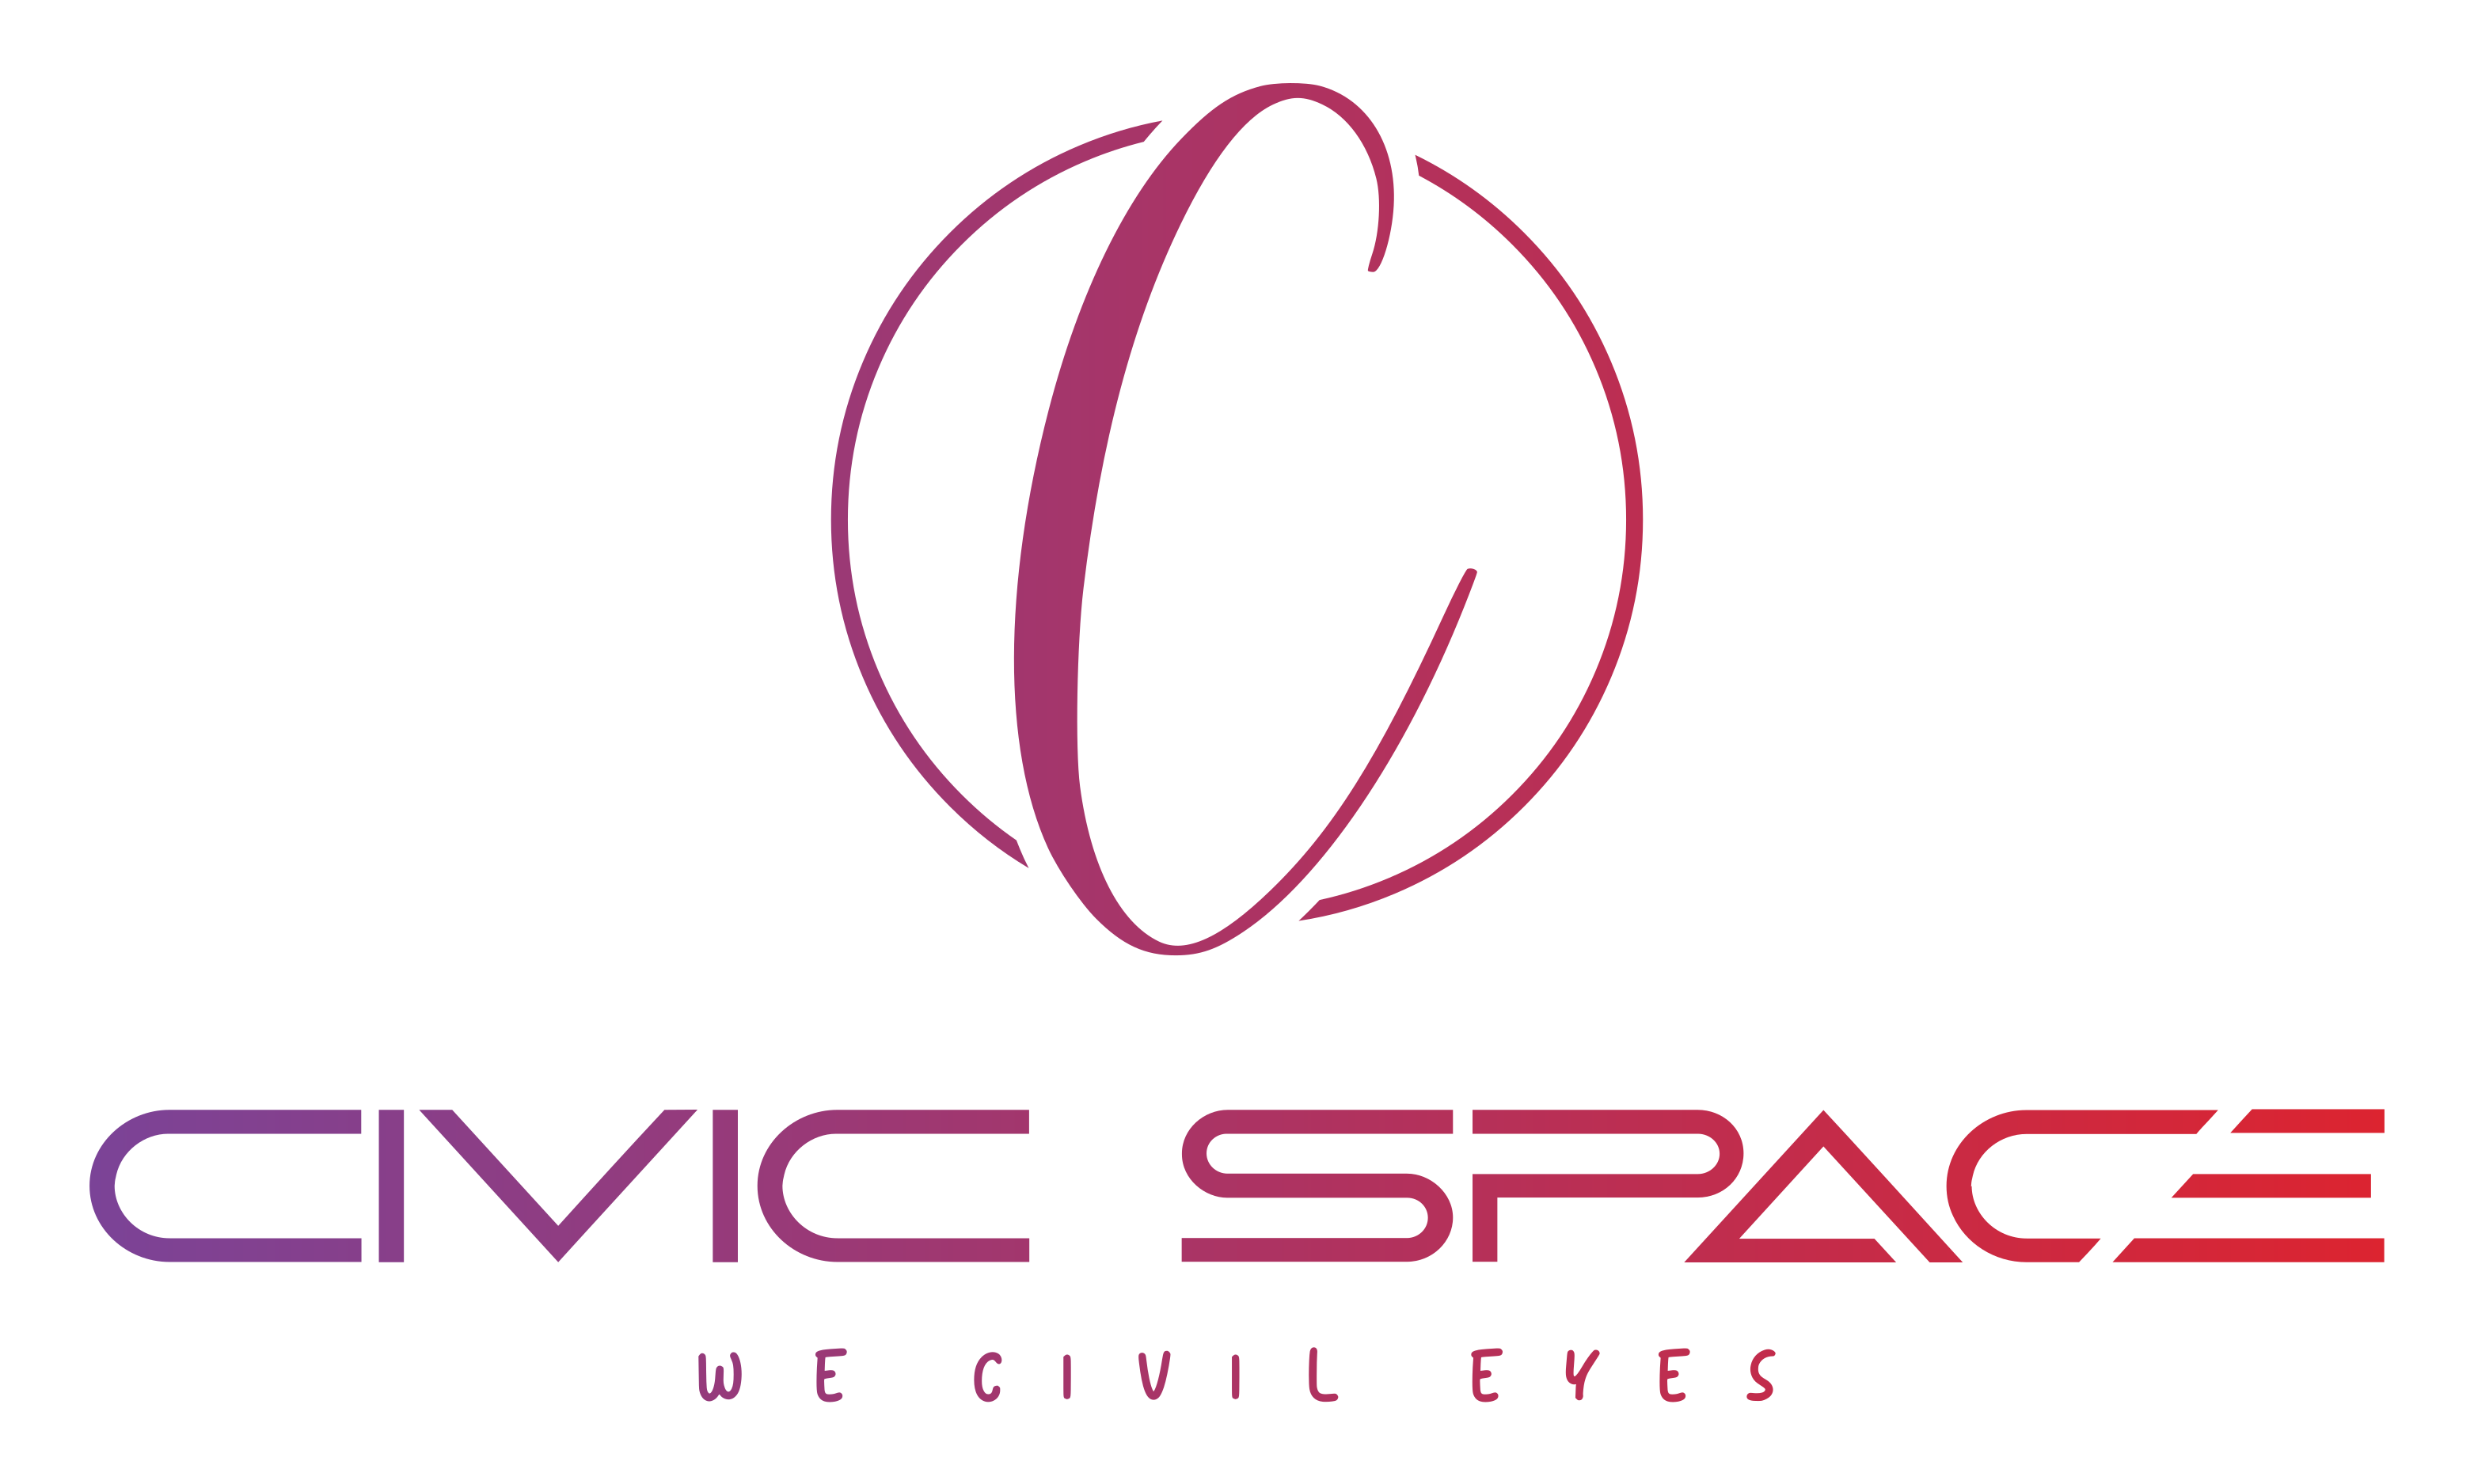 Welcome to Civil Eyes